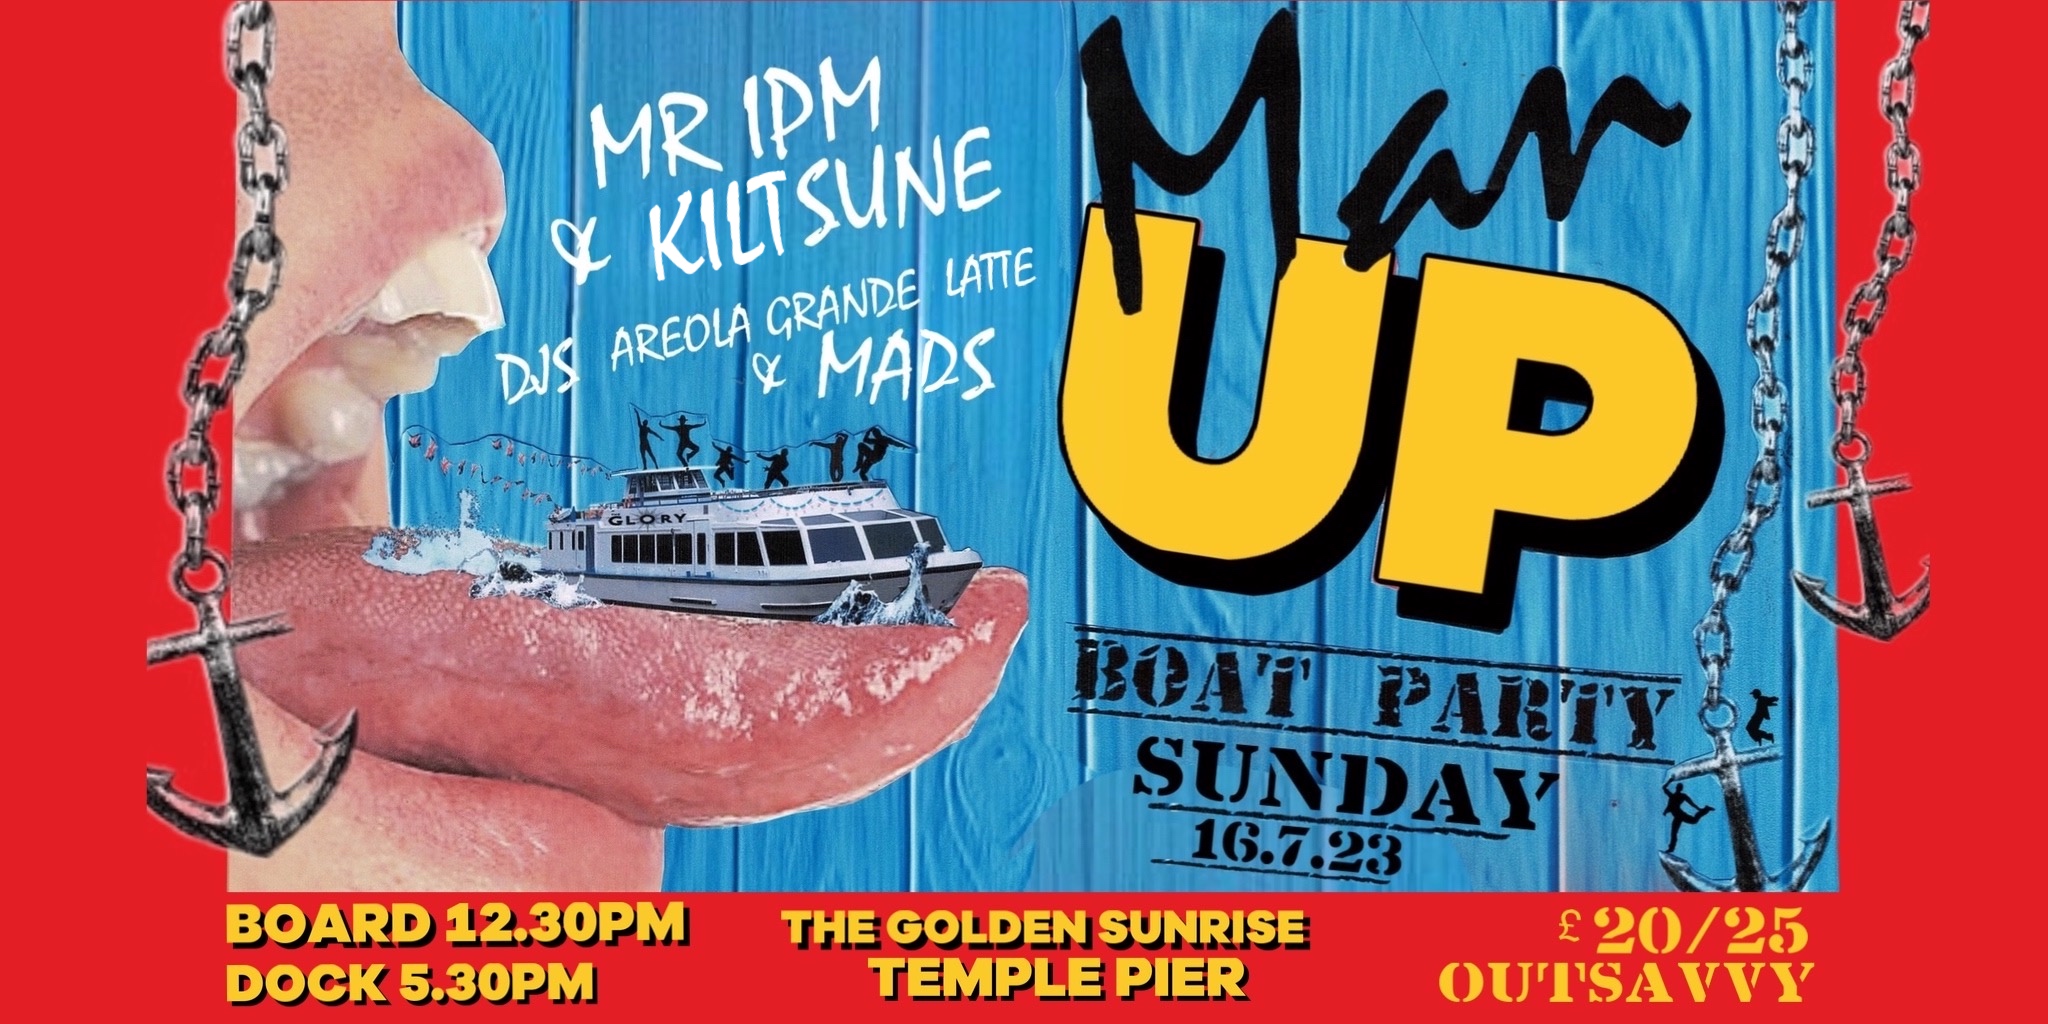 Man Up! – The Glory’s Drag King Boat Party!